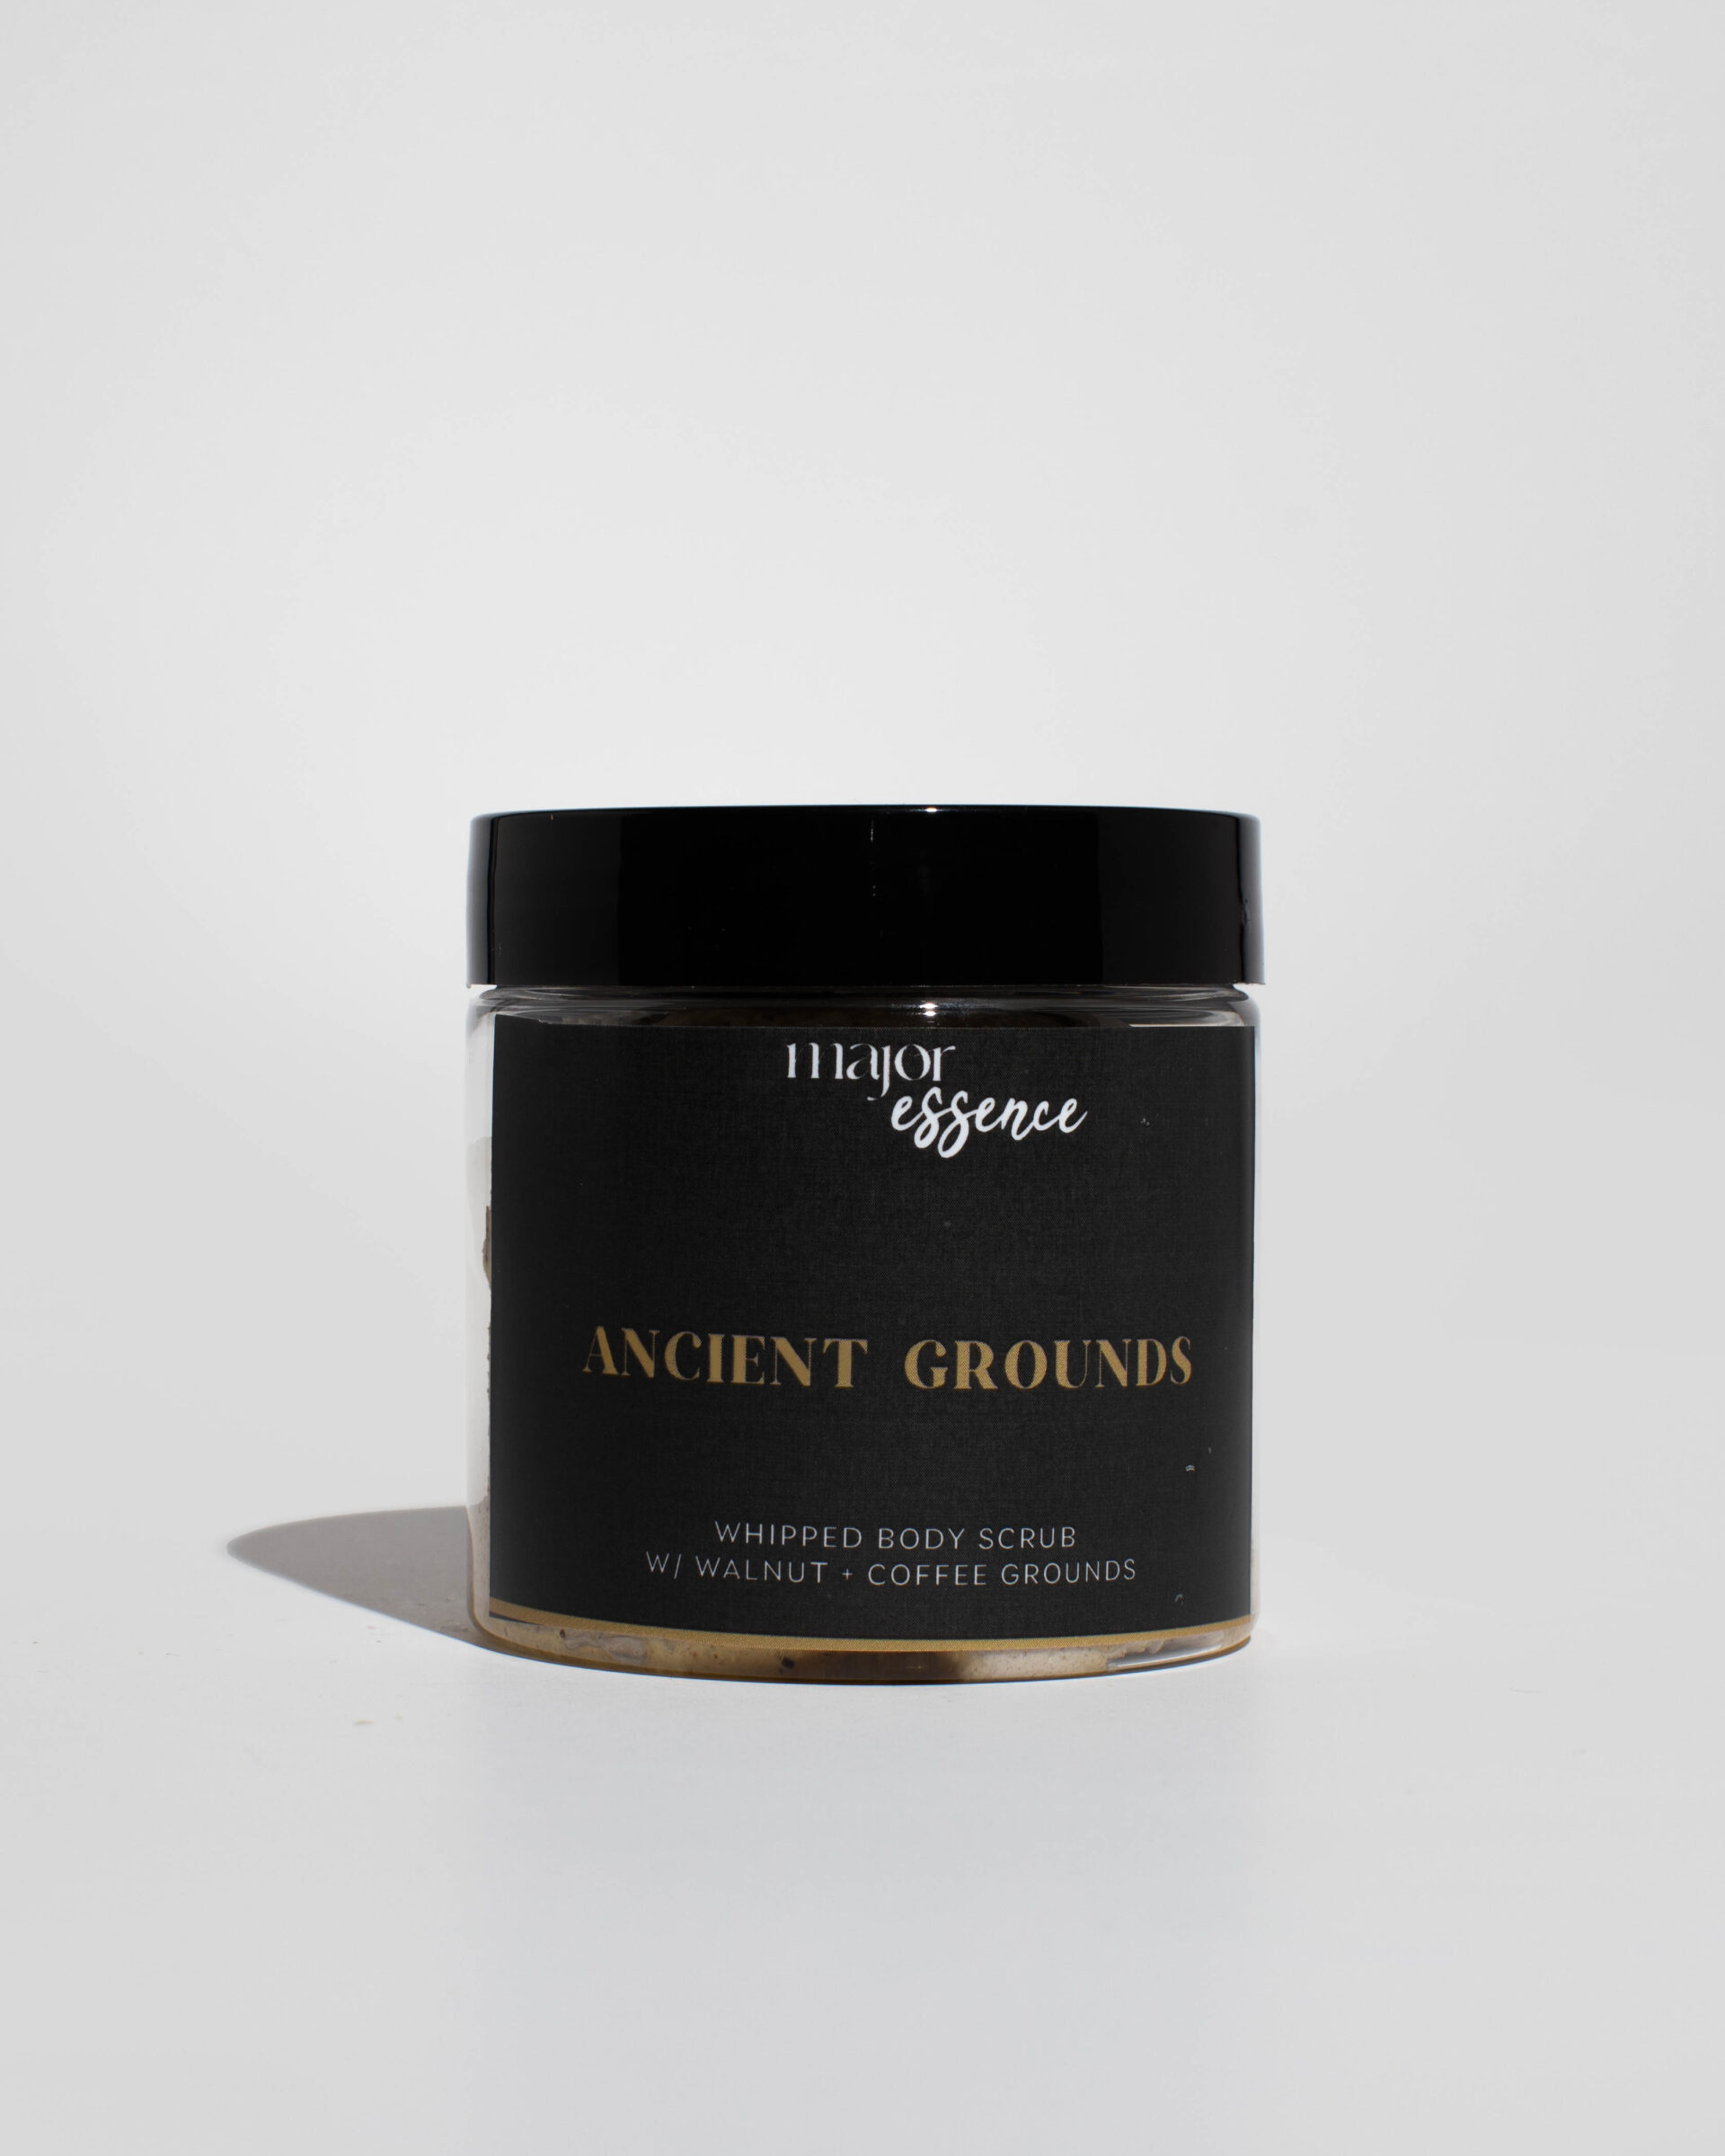 Ancient Grounds | Whipped Body Scrub